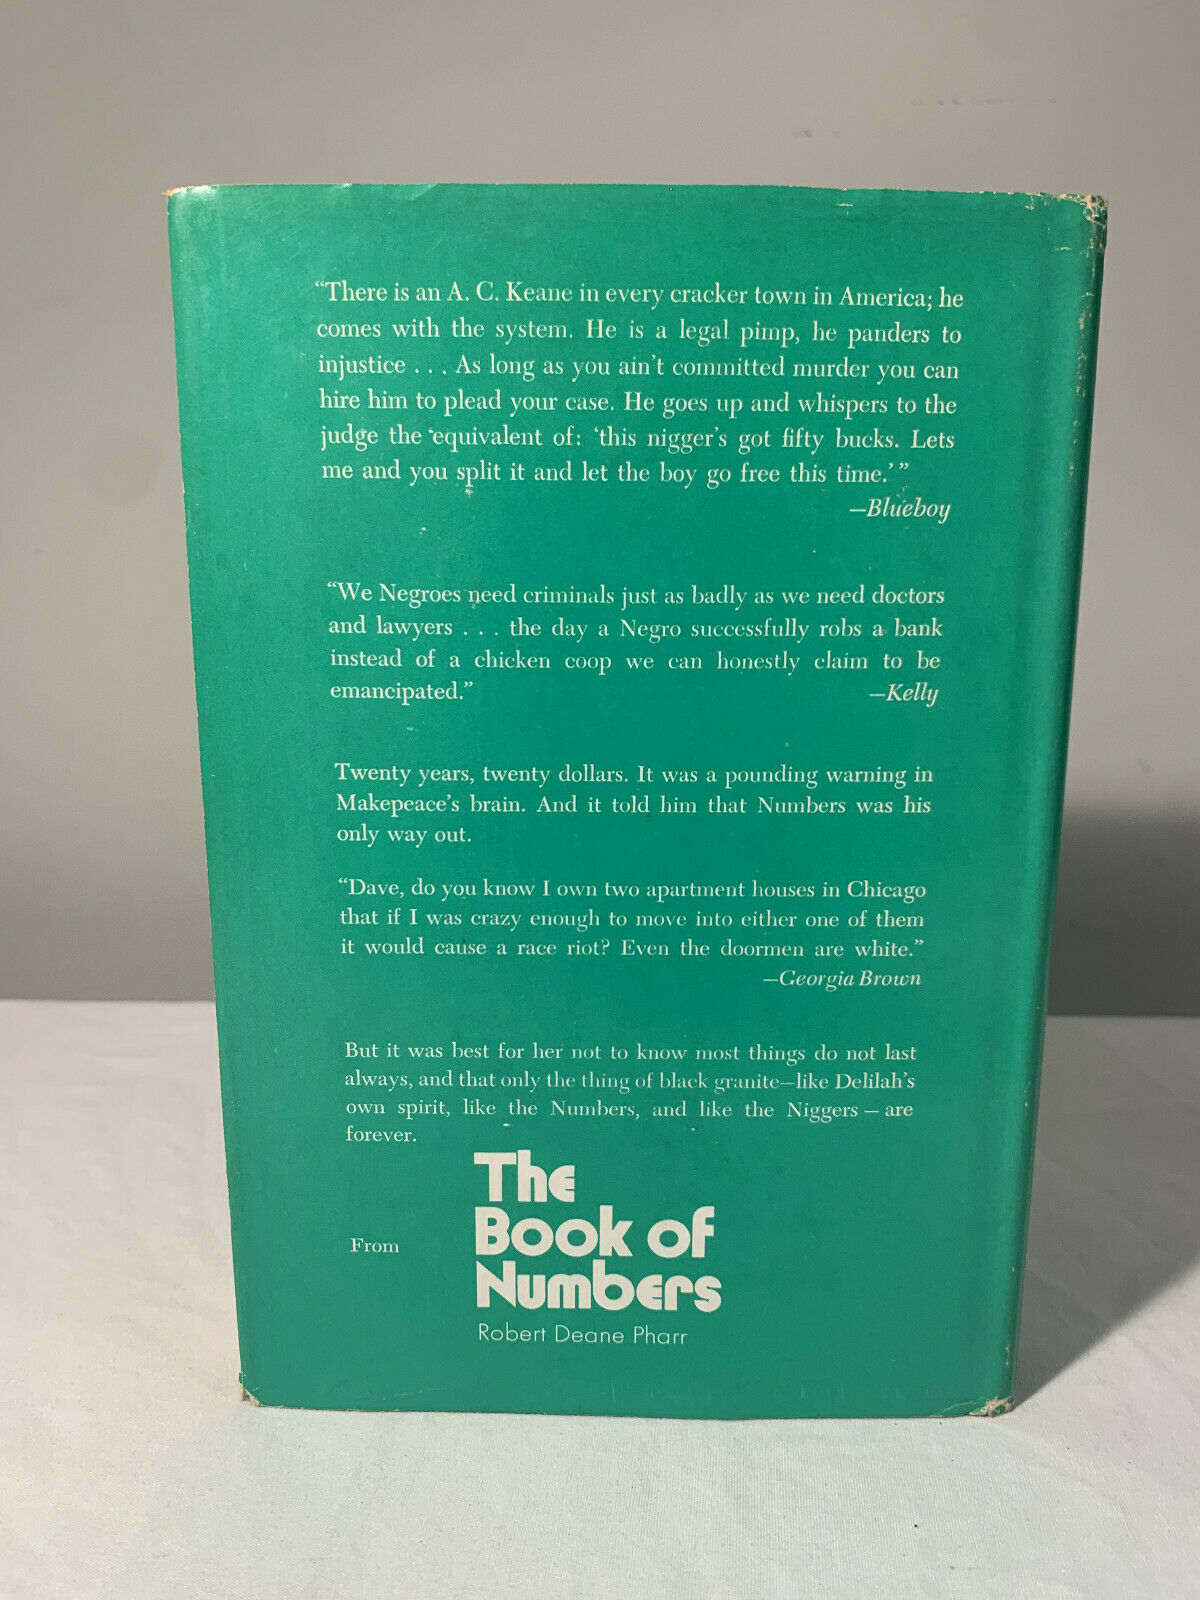 The Book of Numbers by Robert Deane Pharr (O6)